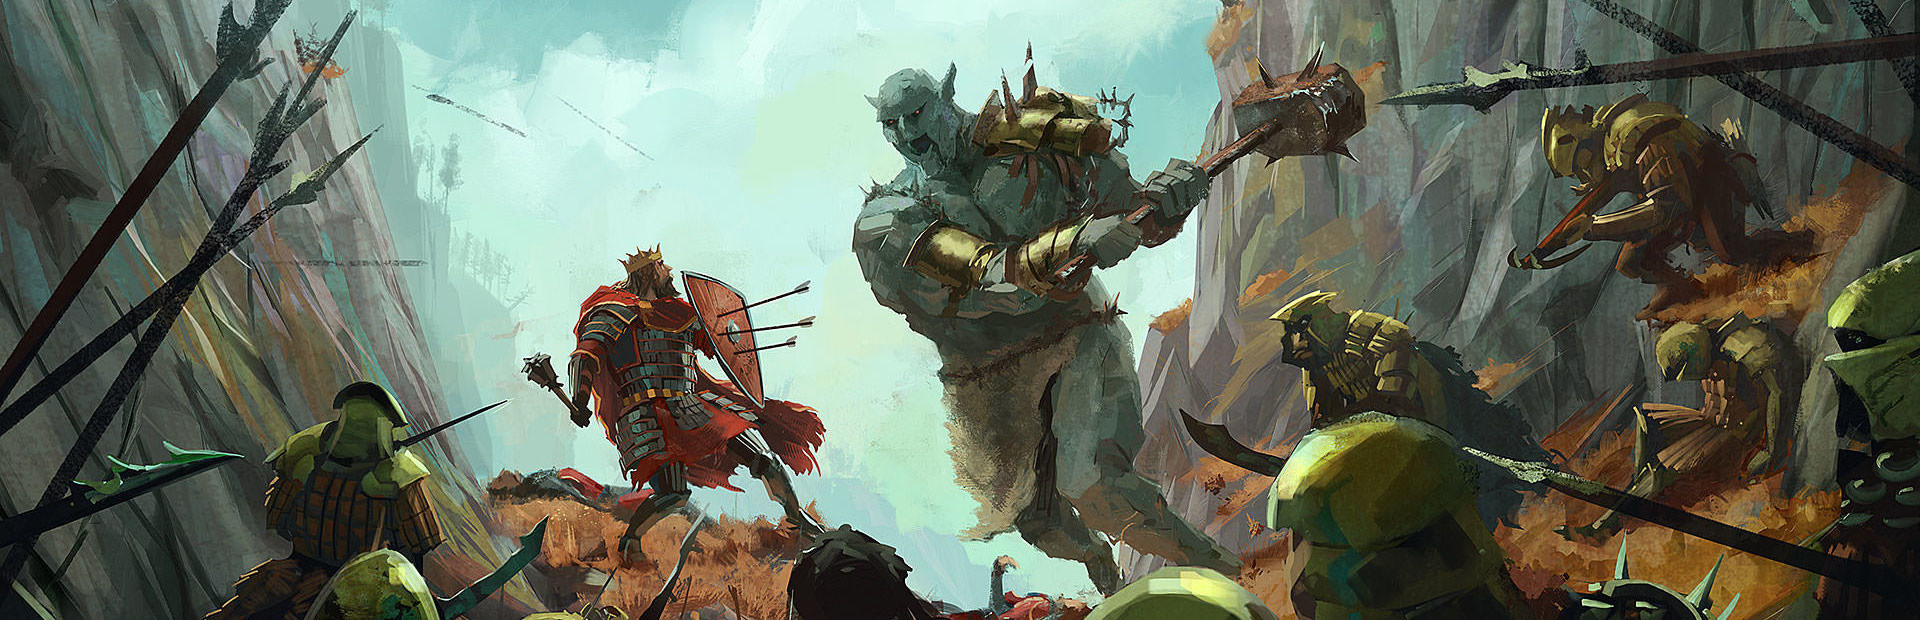 Battle for Wesnoth cover image